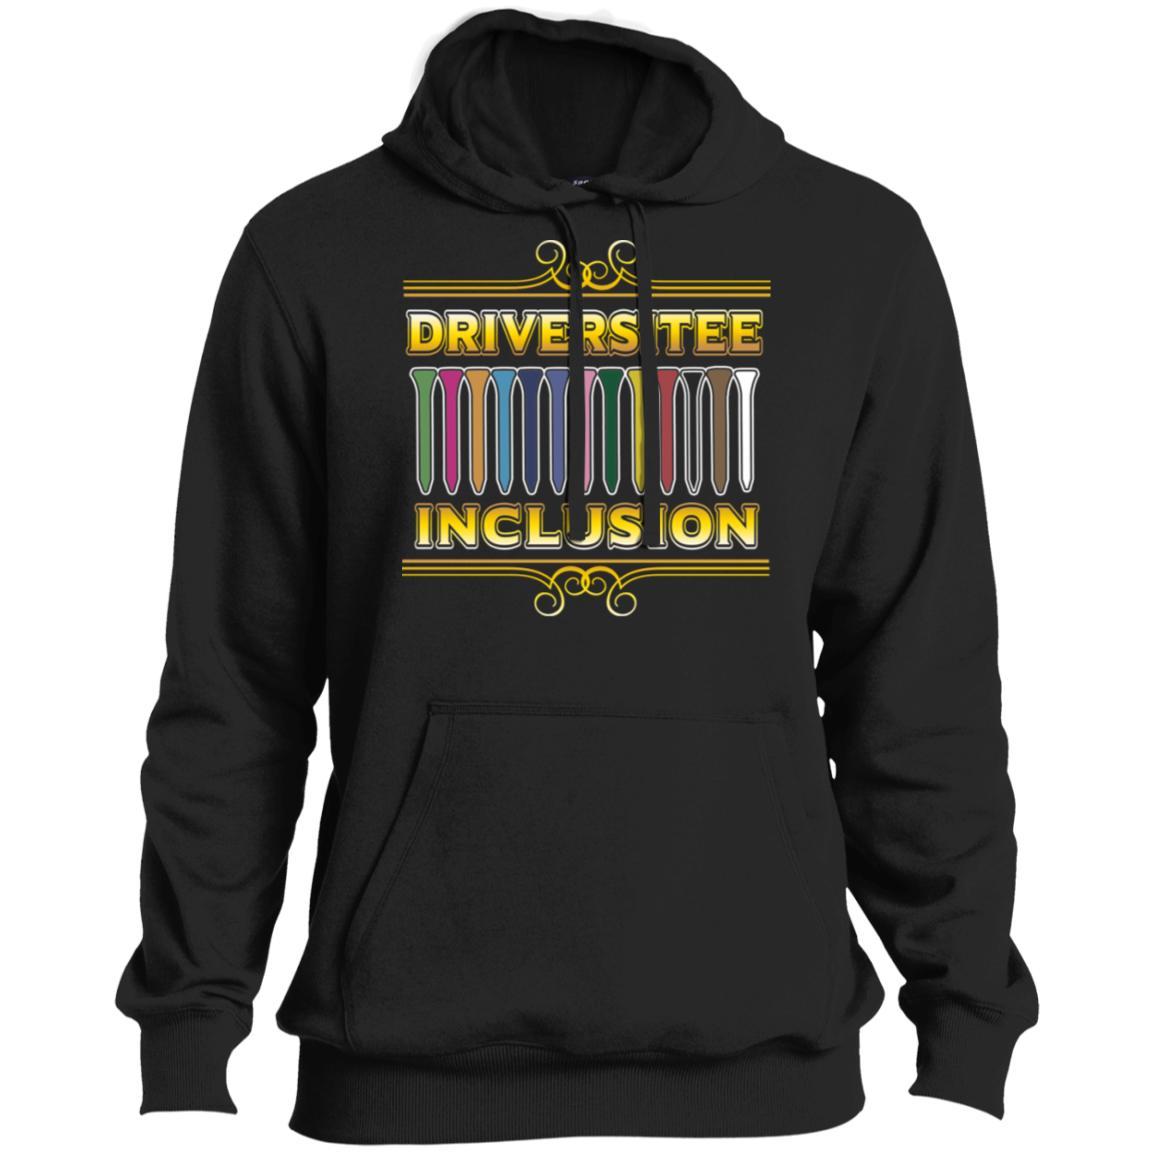 OPG Custom Design #6. Driveristee & Inclusion. Soft Style Pullover Hoodie